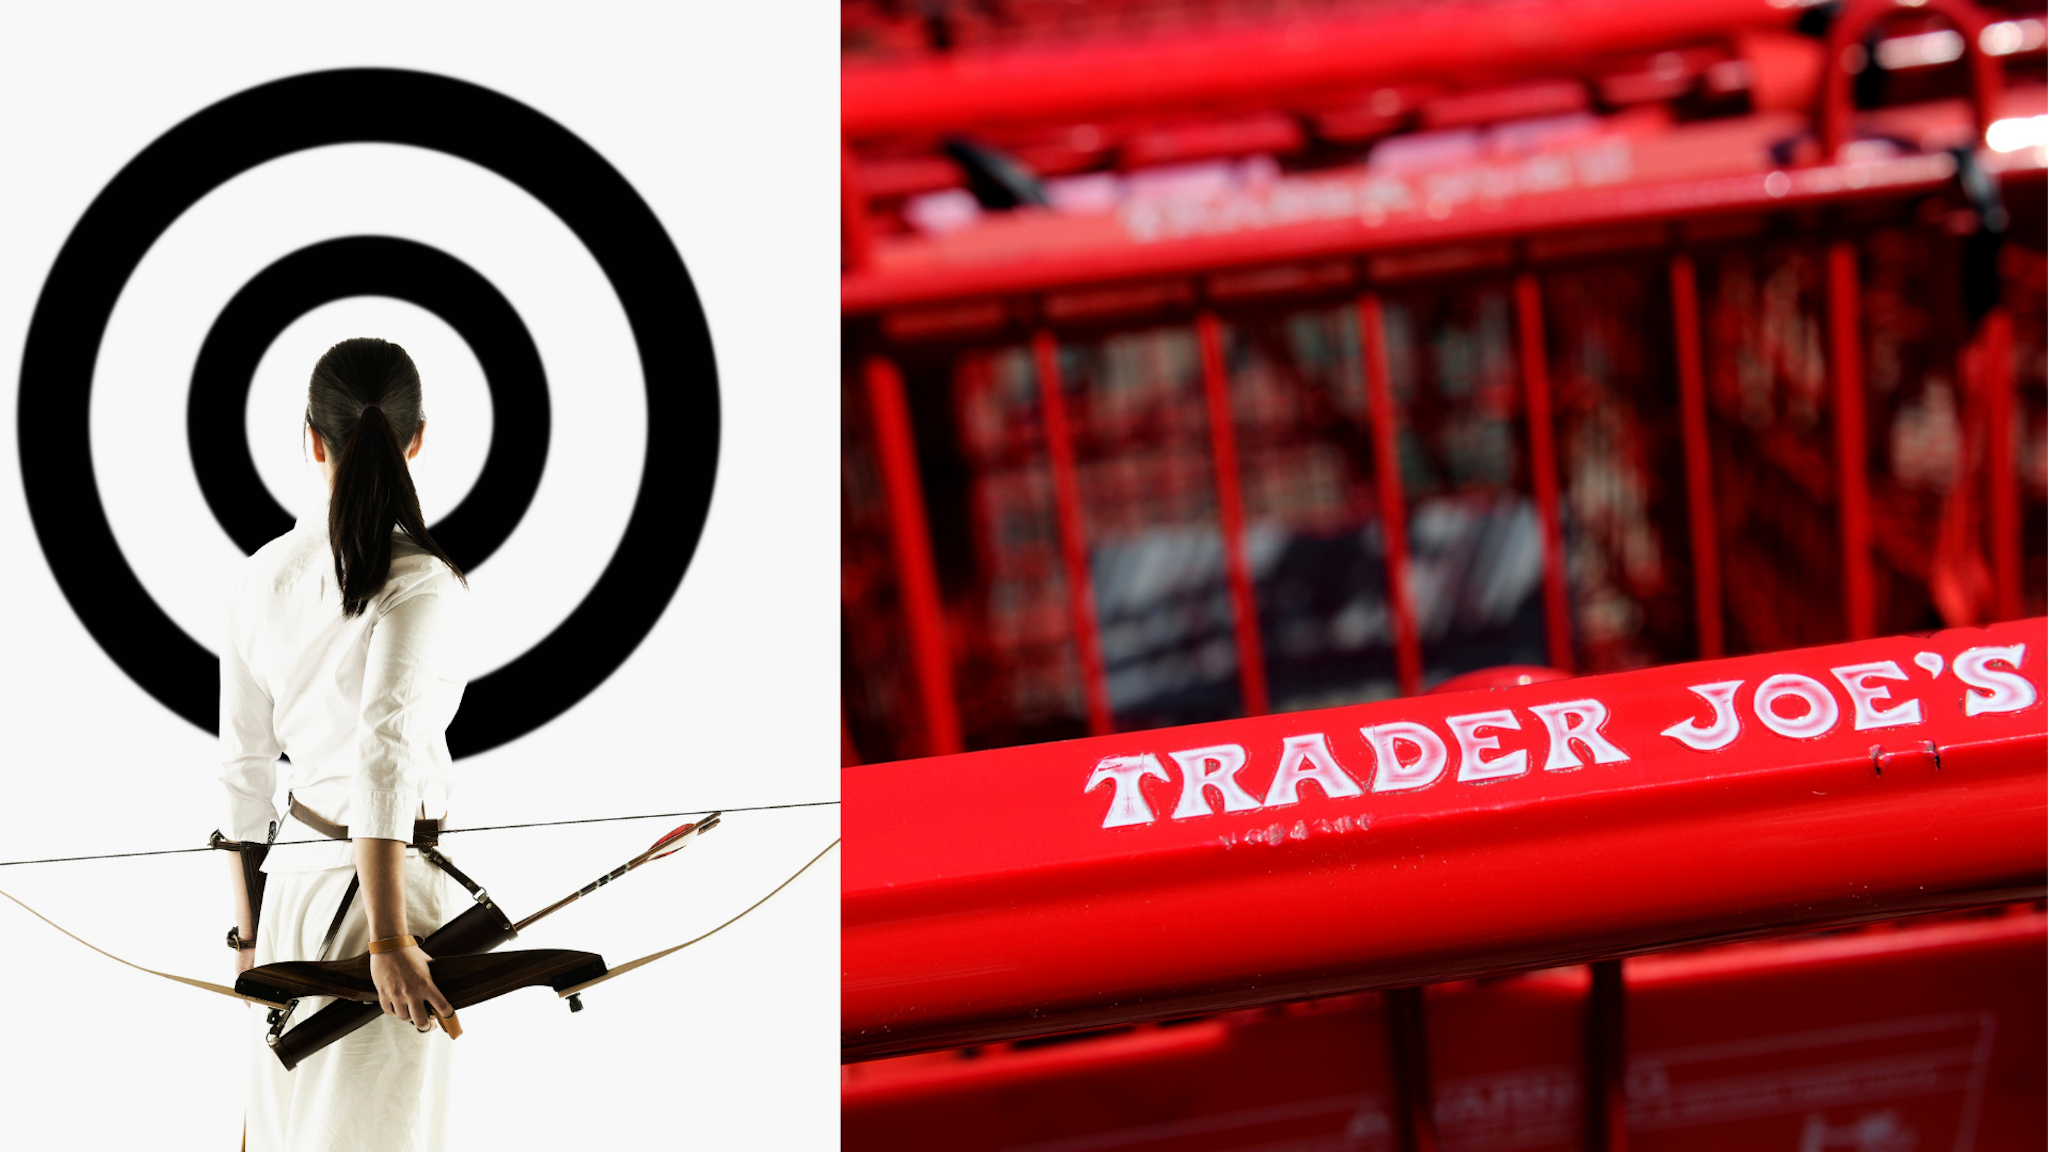 Trader Joe's Co. logo is displayed on shopping carts outside of a store in Emeryville, California, U.S., on Friday, Sept. 13, 2013.